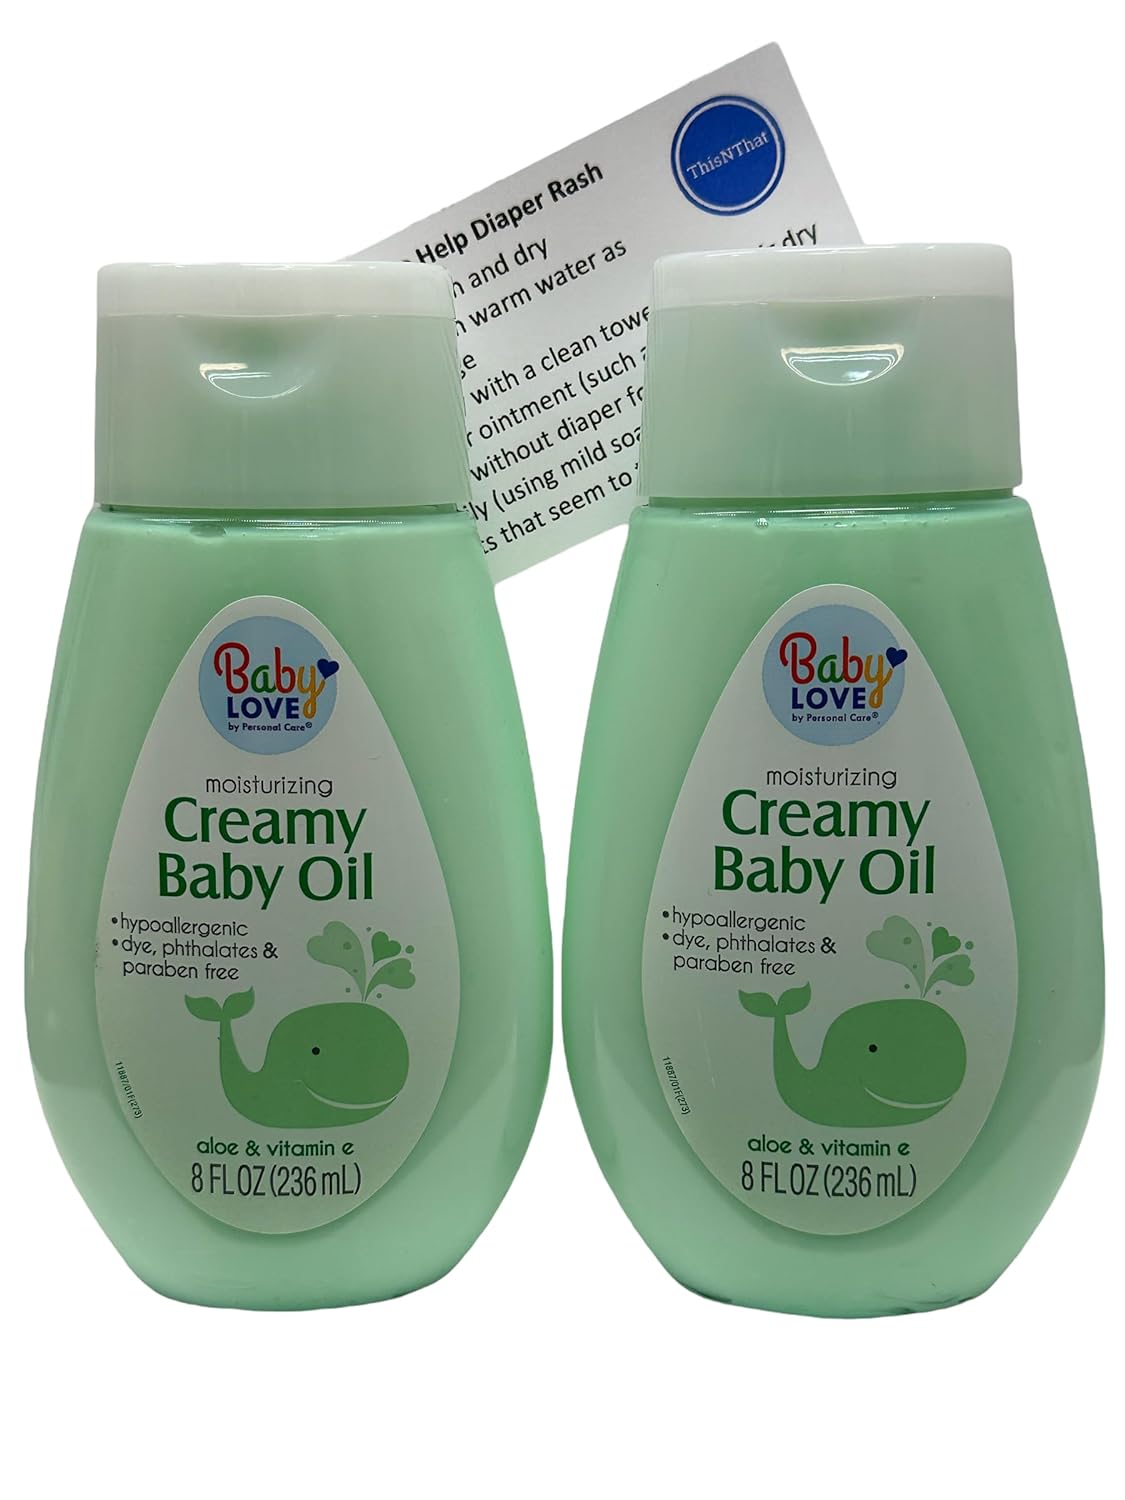 ThisNThat Paraben Free, Hypoallergenic, Moisturizng Baby Oil Bundle Includes: (2) 8oz Baby Love Creamy Baby Oil Recipe Card